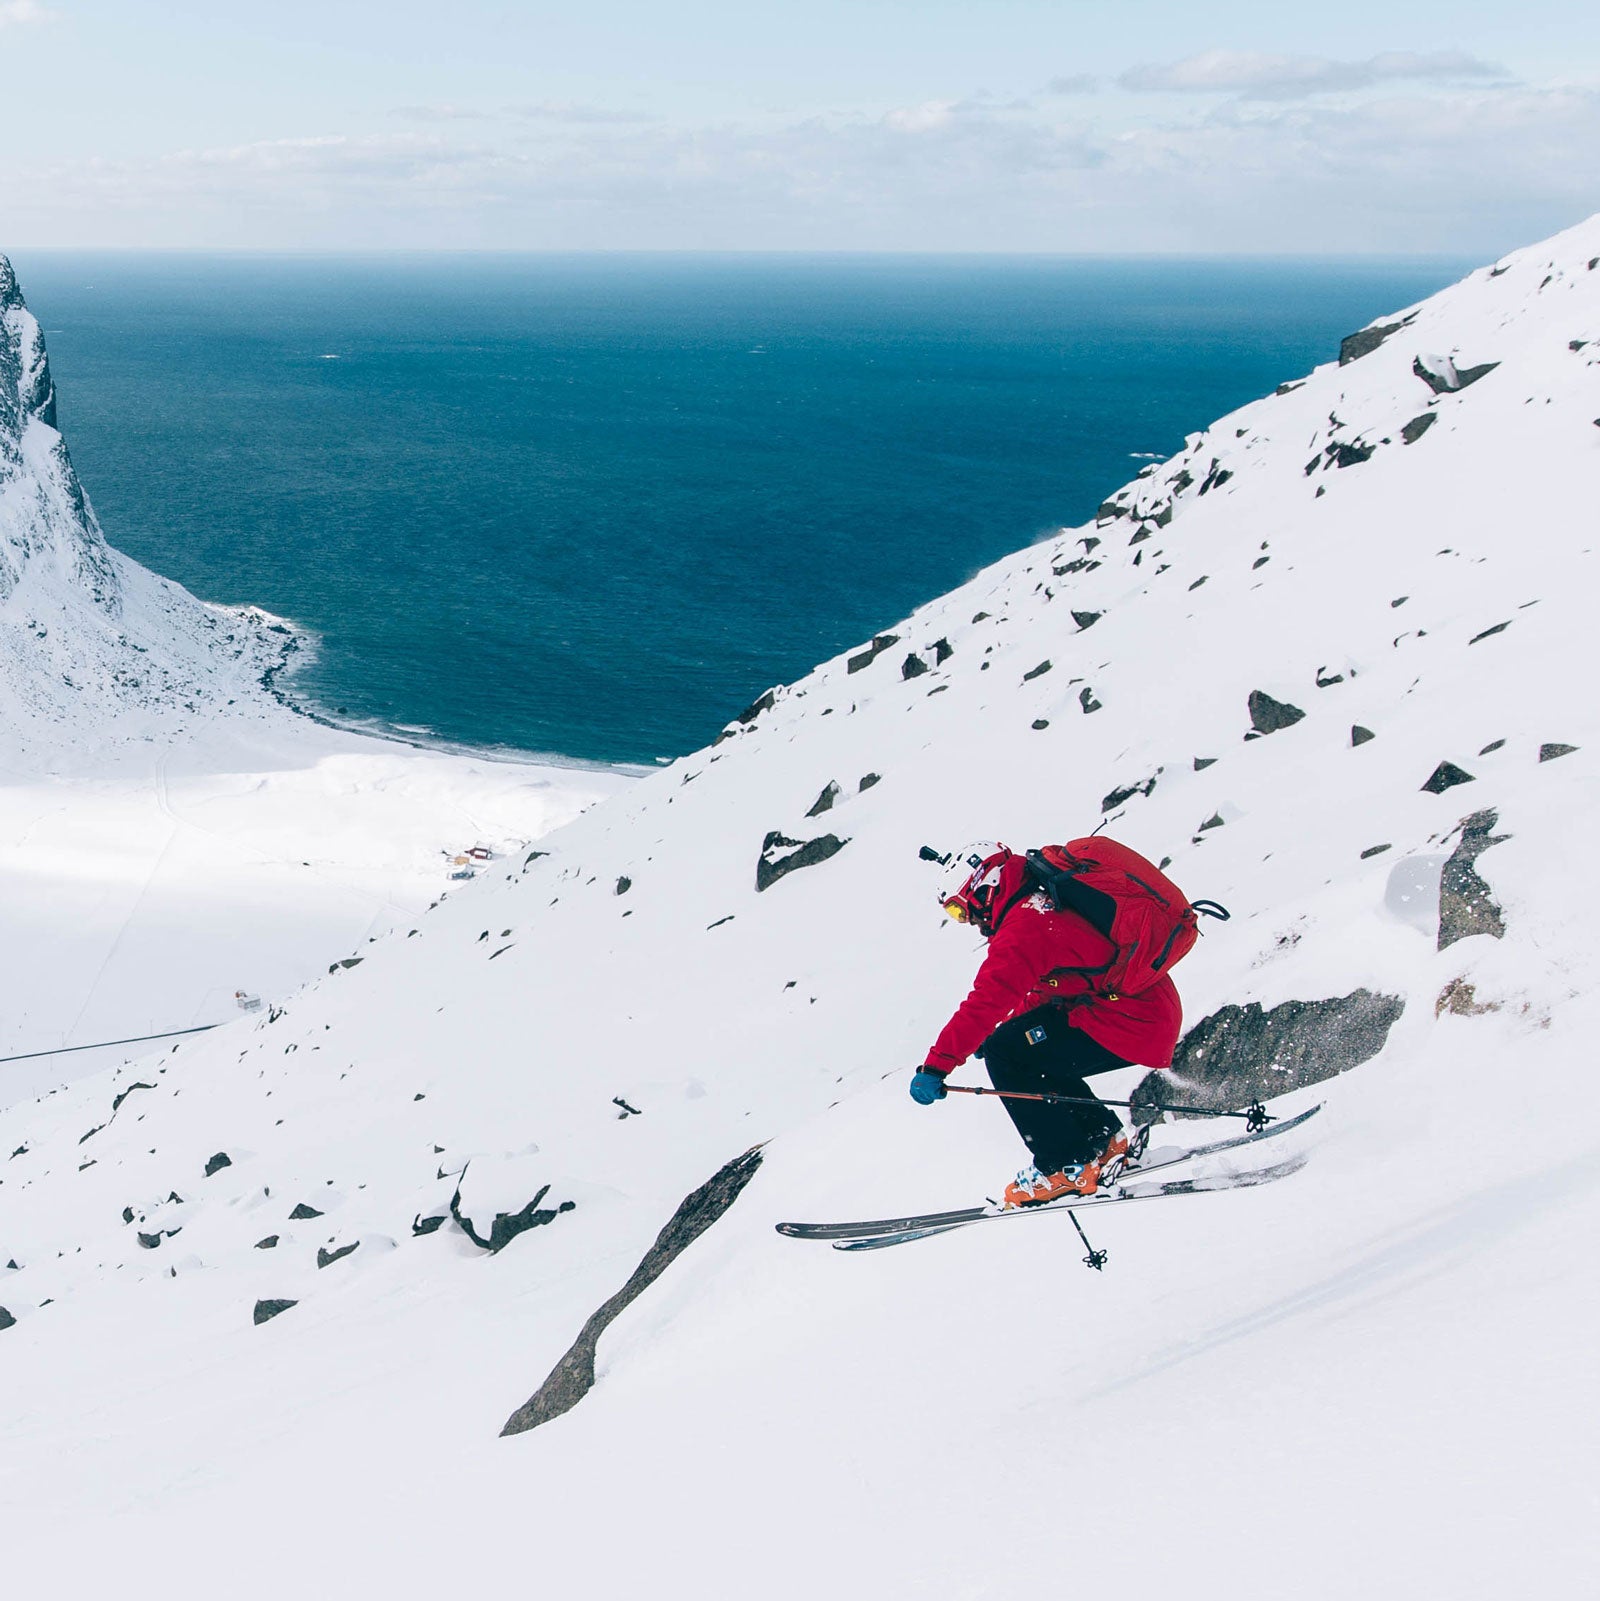 The Way-Too-Early Guide to Backcountry Ski Gear